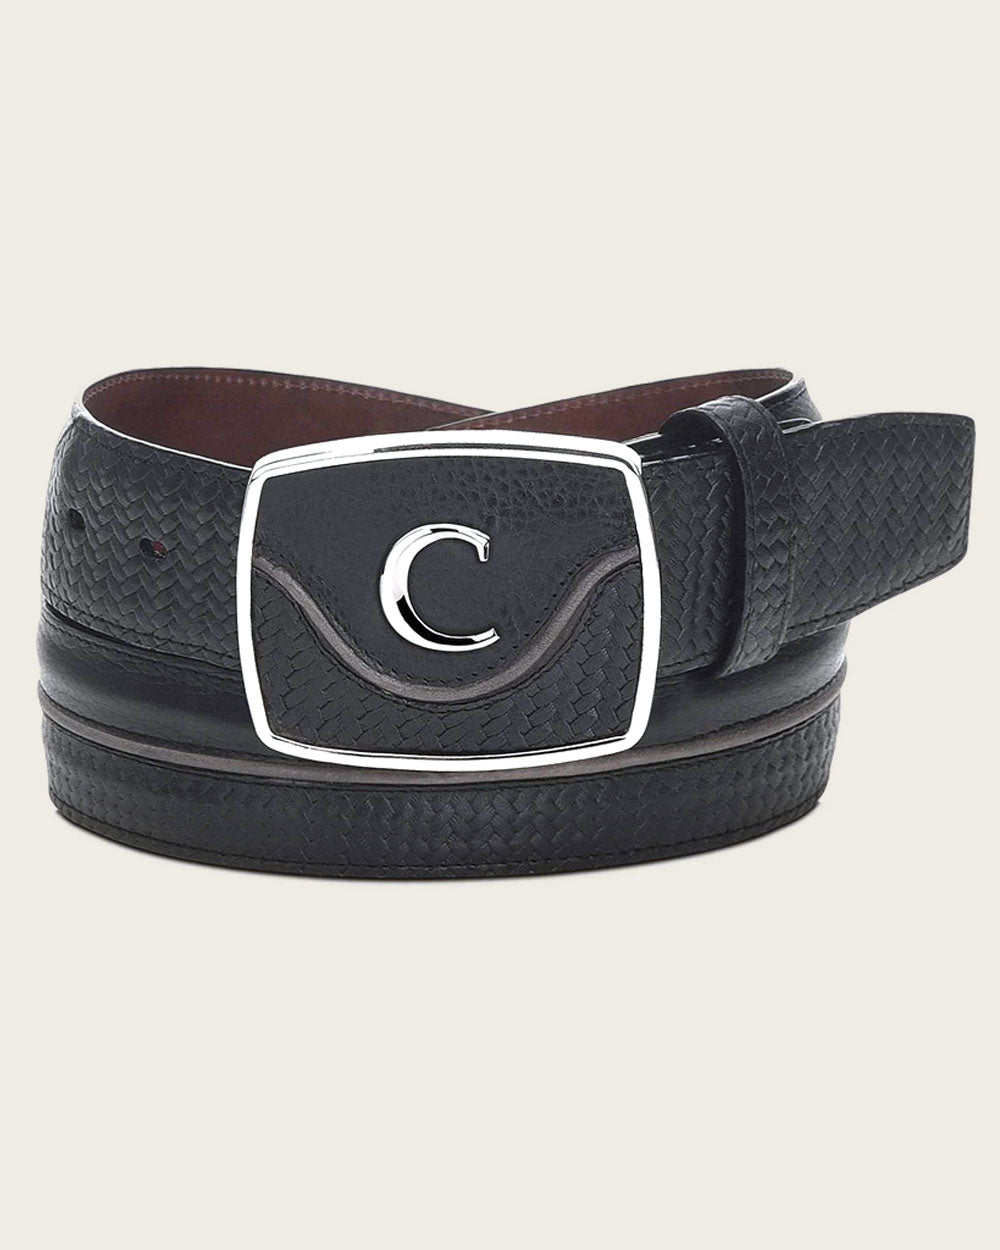 Premium Bovine Leather Belt: Crafted from high-quality bovine leather that ages beautifully over time. 